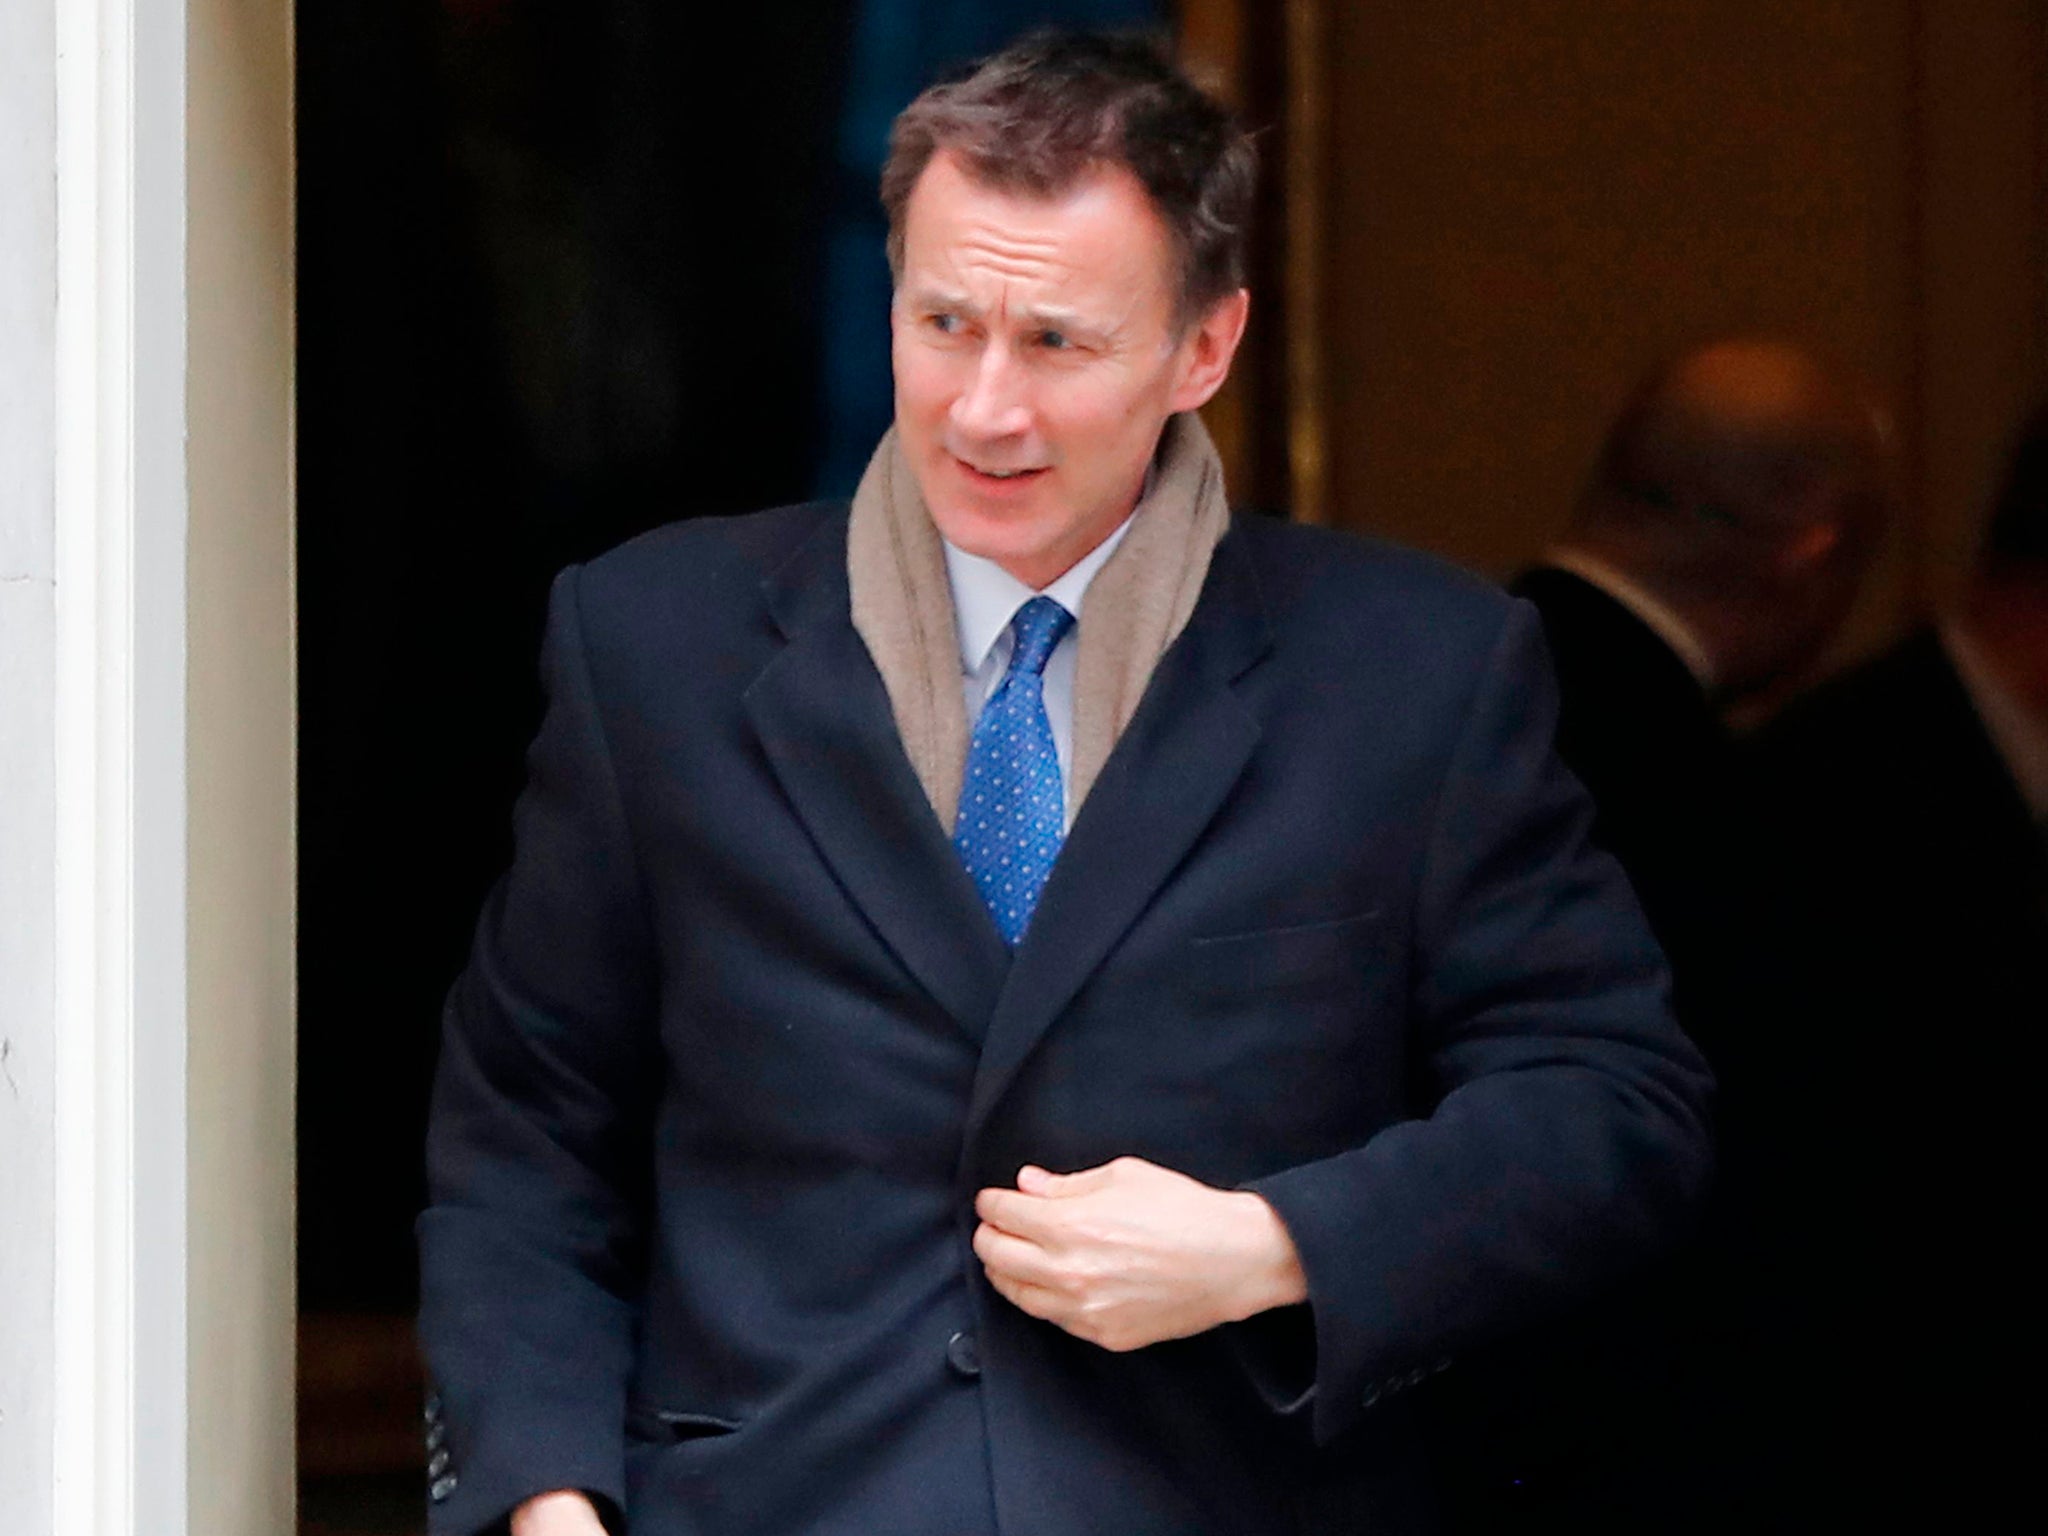 Britain's Health and Social Care Secretary Jeremy Hunt leaves 10 Downing Street